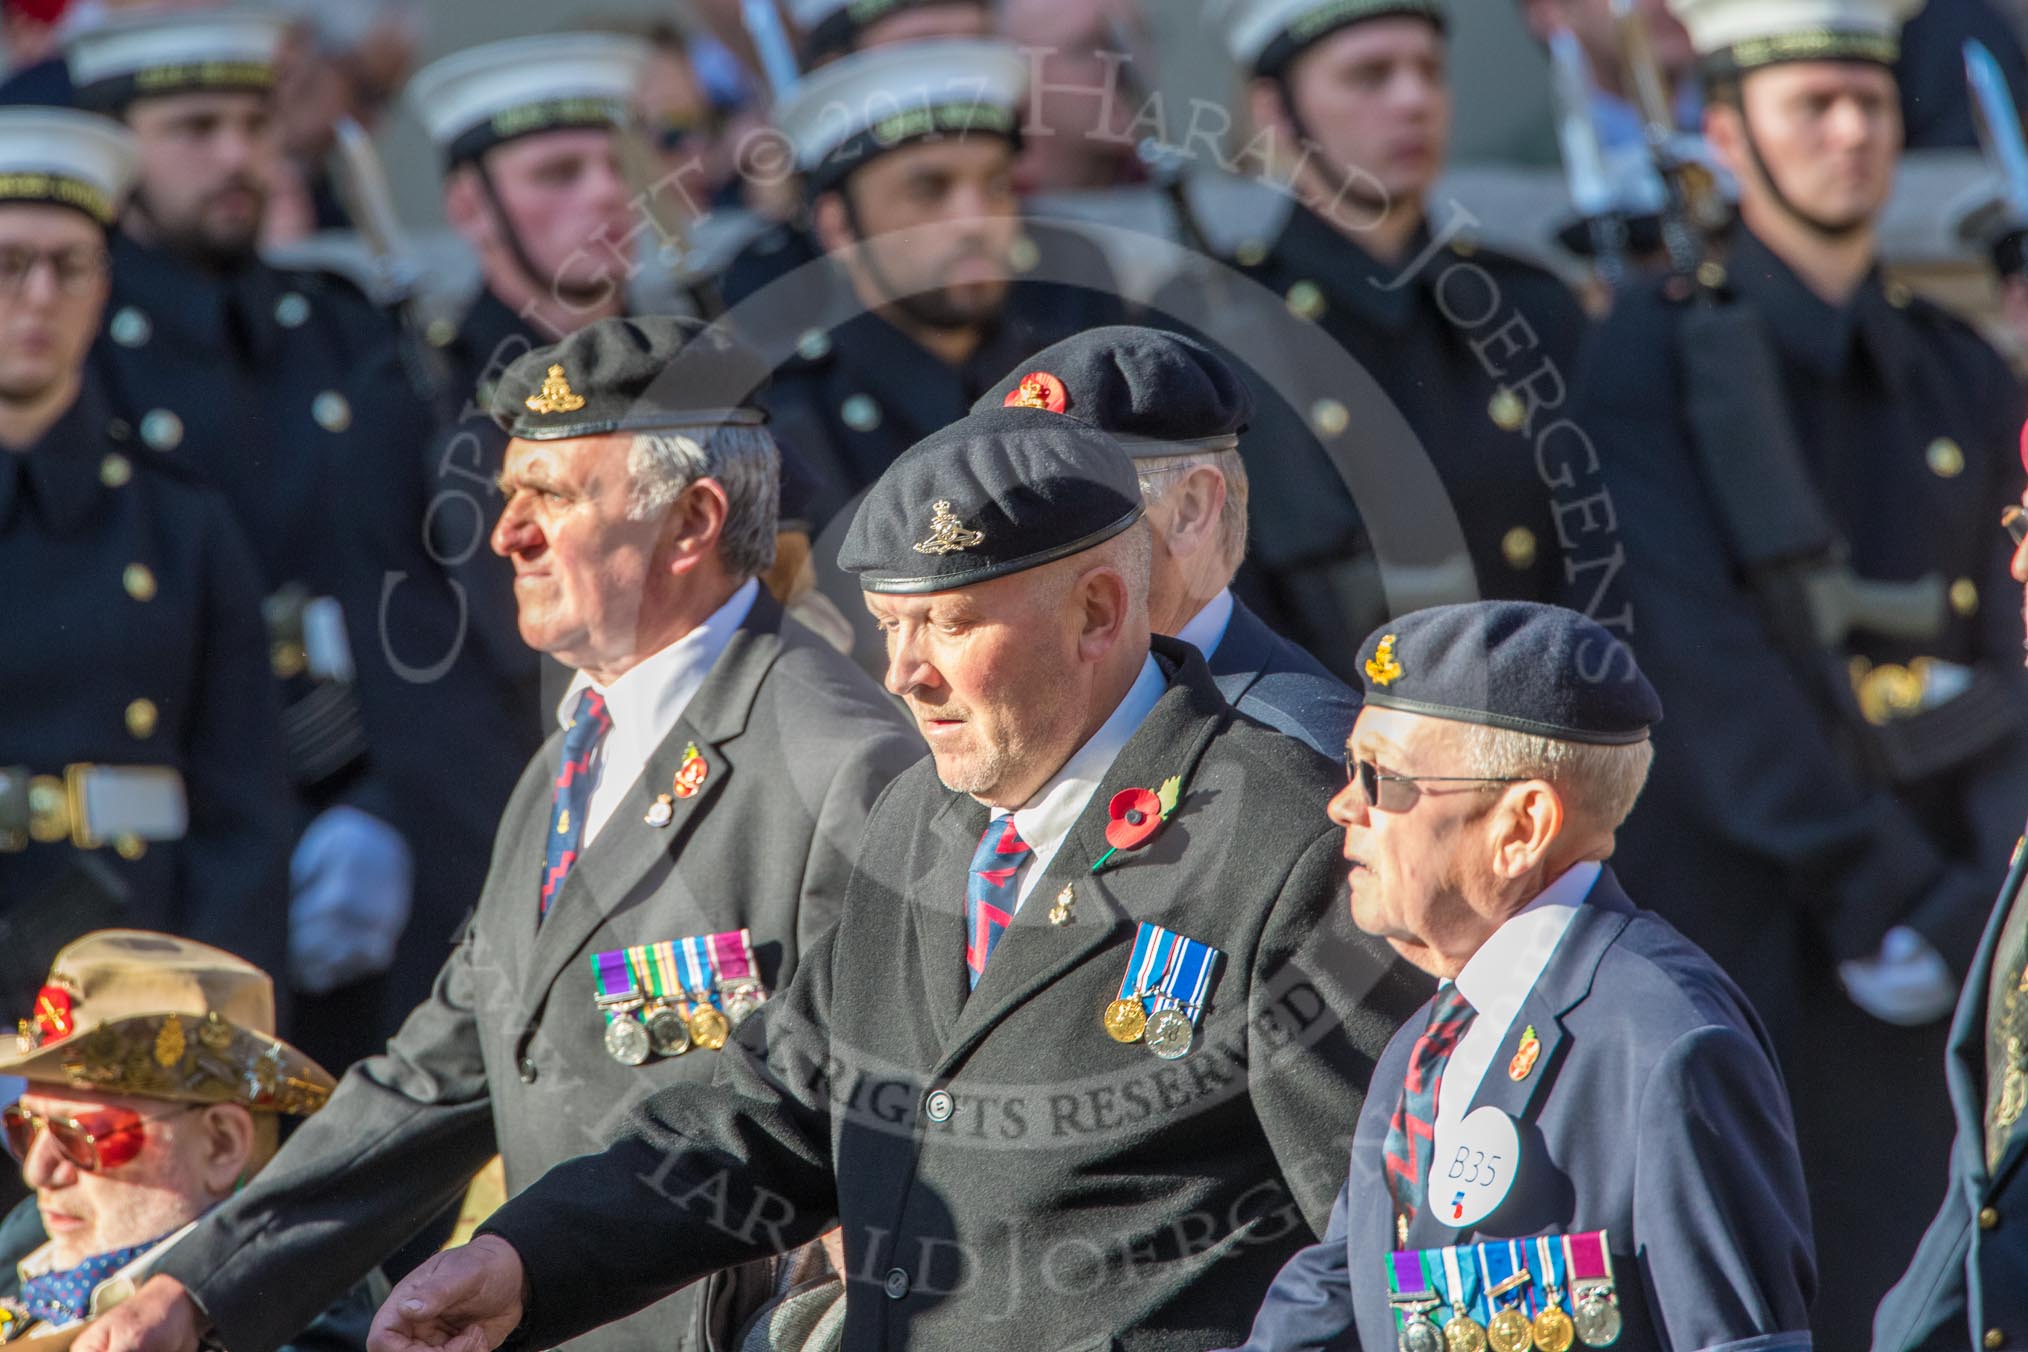 The Royal Artillery Association (Group B35, 32 members) during the Royal British Legion March Past on Remembrance Sunday at the Cenotaph, Whitehall, Westminster, London, 11 November 2018, 12:13.